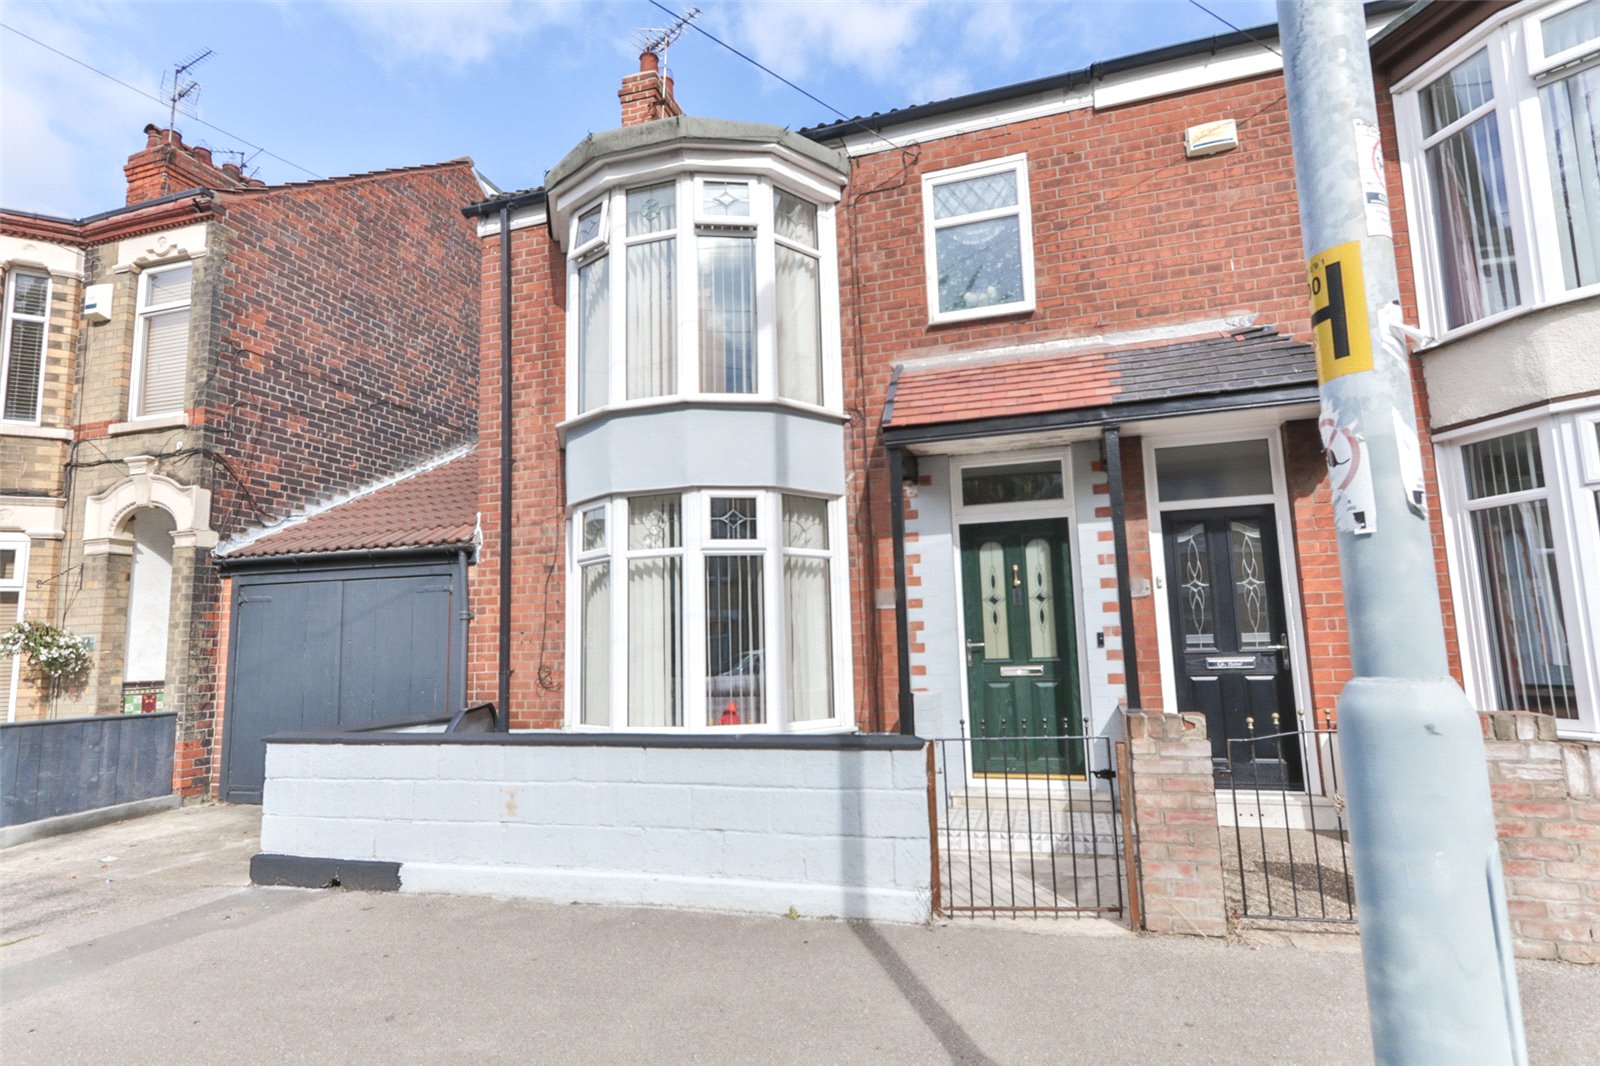 2 bed house for sale in Brindley Street, Hull, HU9 